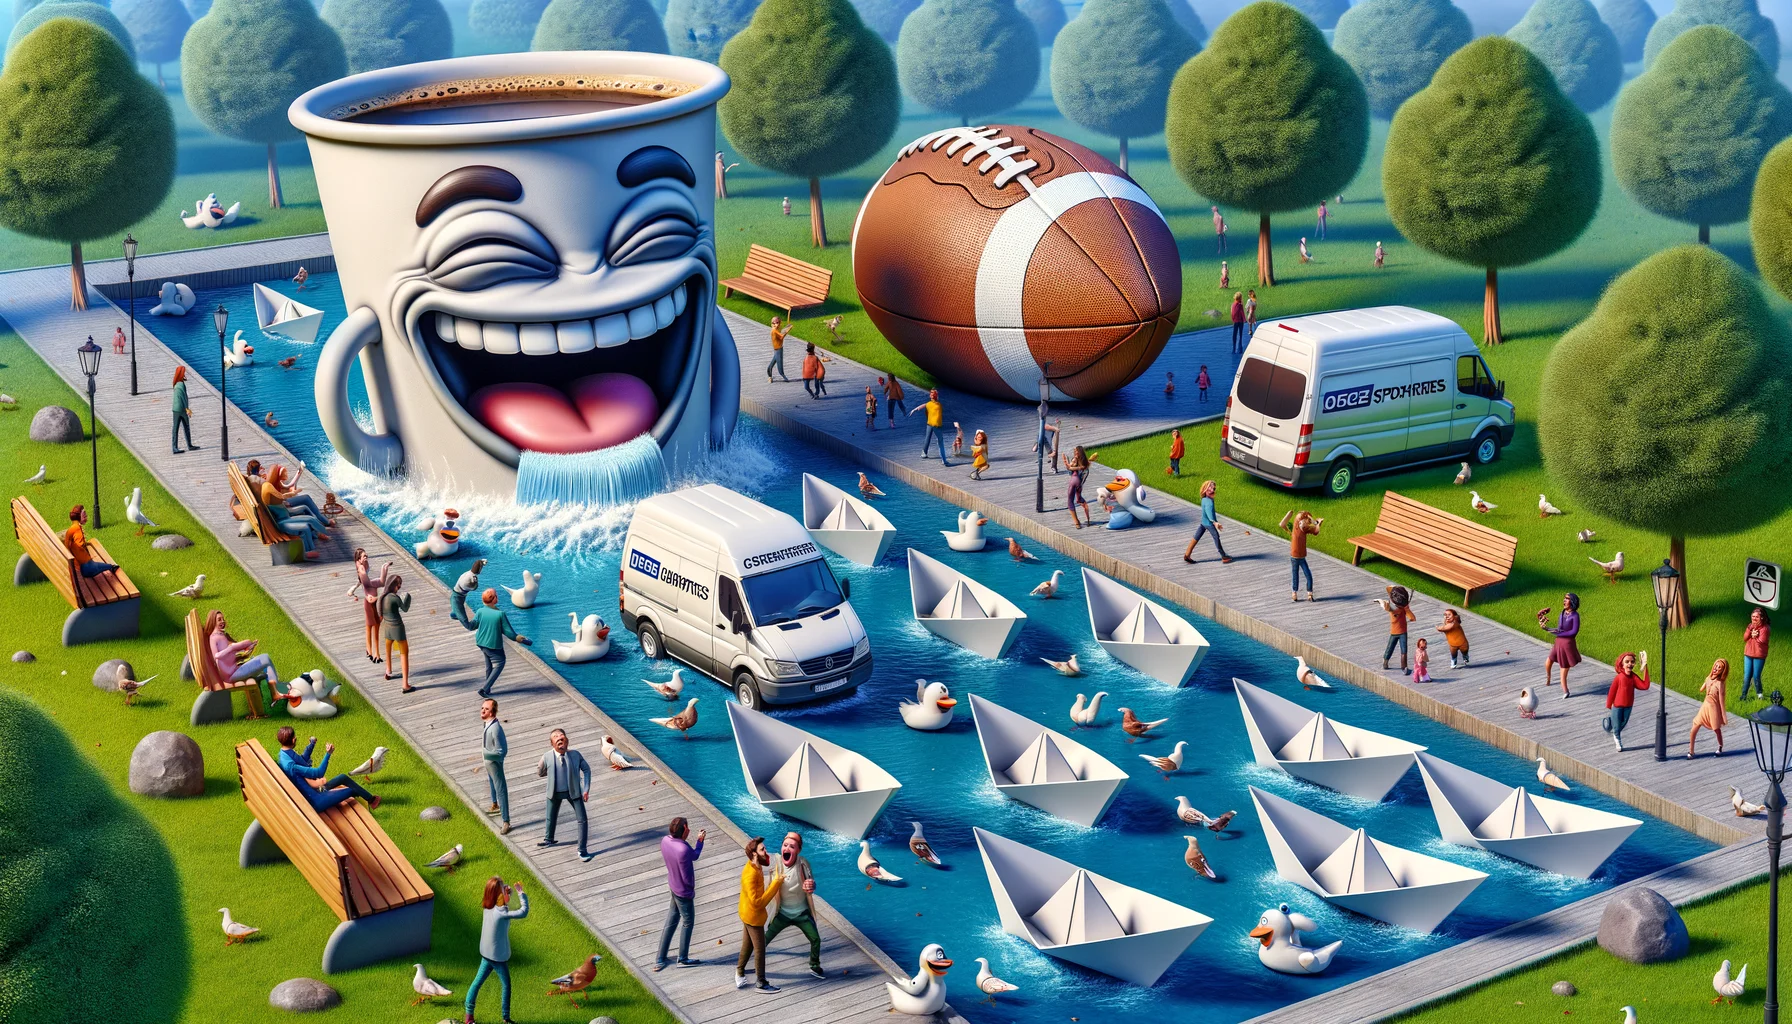 Imagine a playful and humorous scene involving an imaginary park. In the center, there's a comedic caricature of a large laughing coffee cup and an oversized plush football, symbolizing a cafe and a sports company - they are our trusted sponsors. Surrounding them are numerous paper boats resembling a fleet of delivery vans - our partners - floating leisurely in a manmade stream. To add a touch of realism, include details such as trees, grass, pigeons pecking at crumbs, park benches, and visitors of different ages and descents, capturing a diverse range of reactions from surprise to amusement.